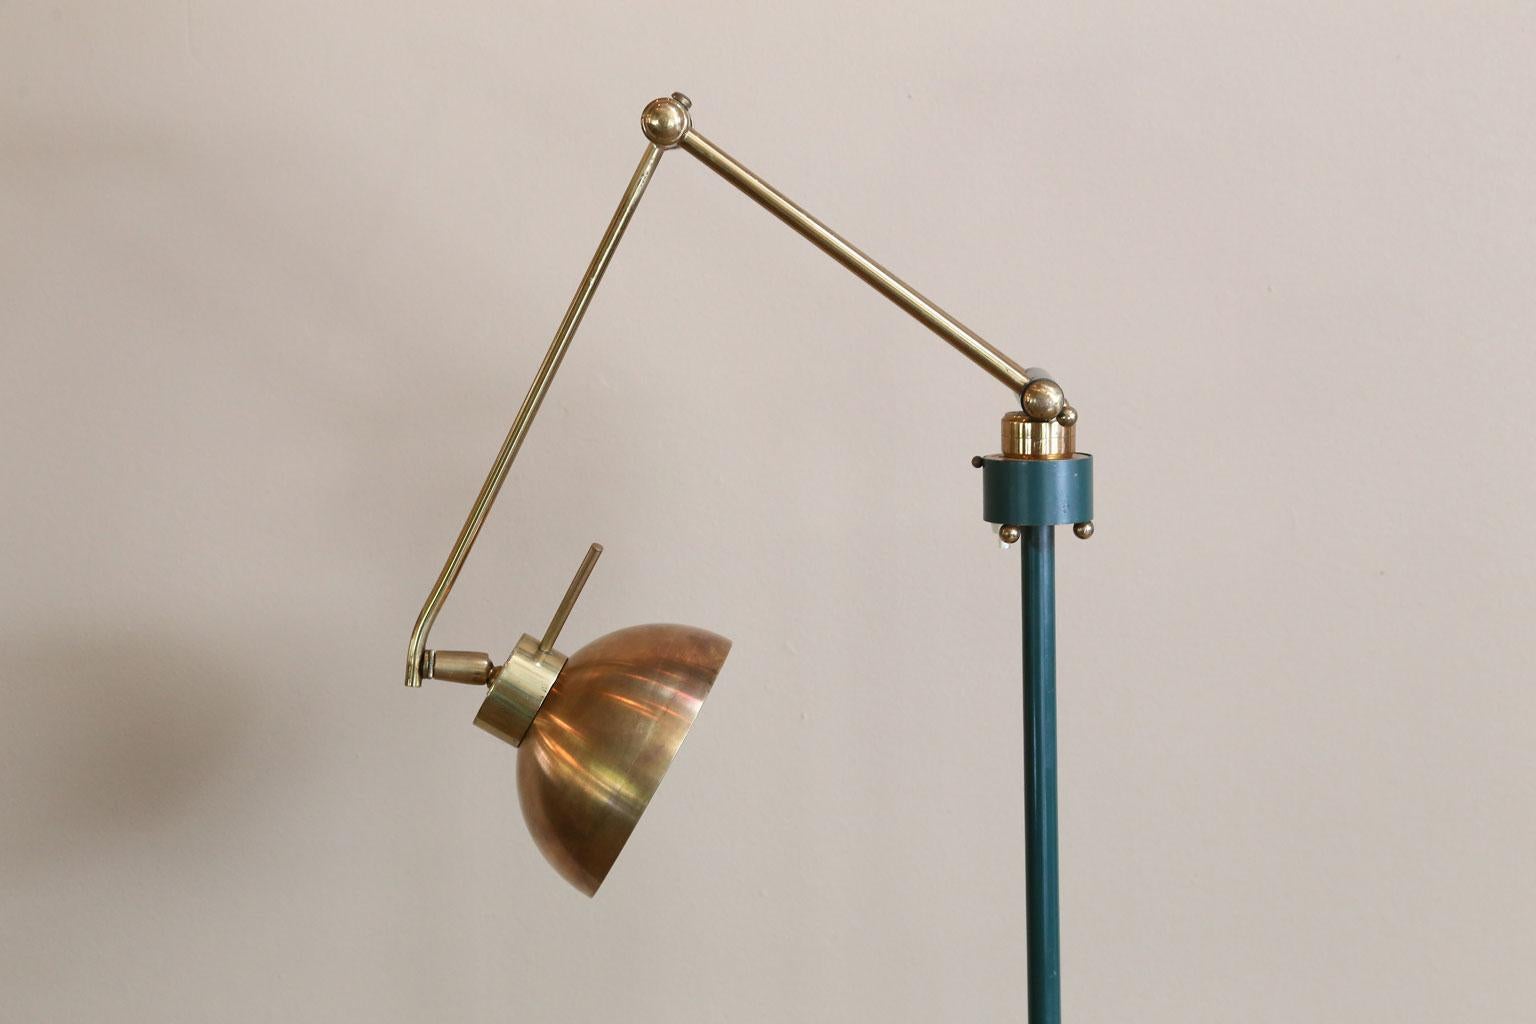 20th Century Modern Polychrome Brass Floor Lamp with Moveable Arm from France